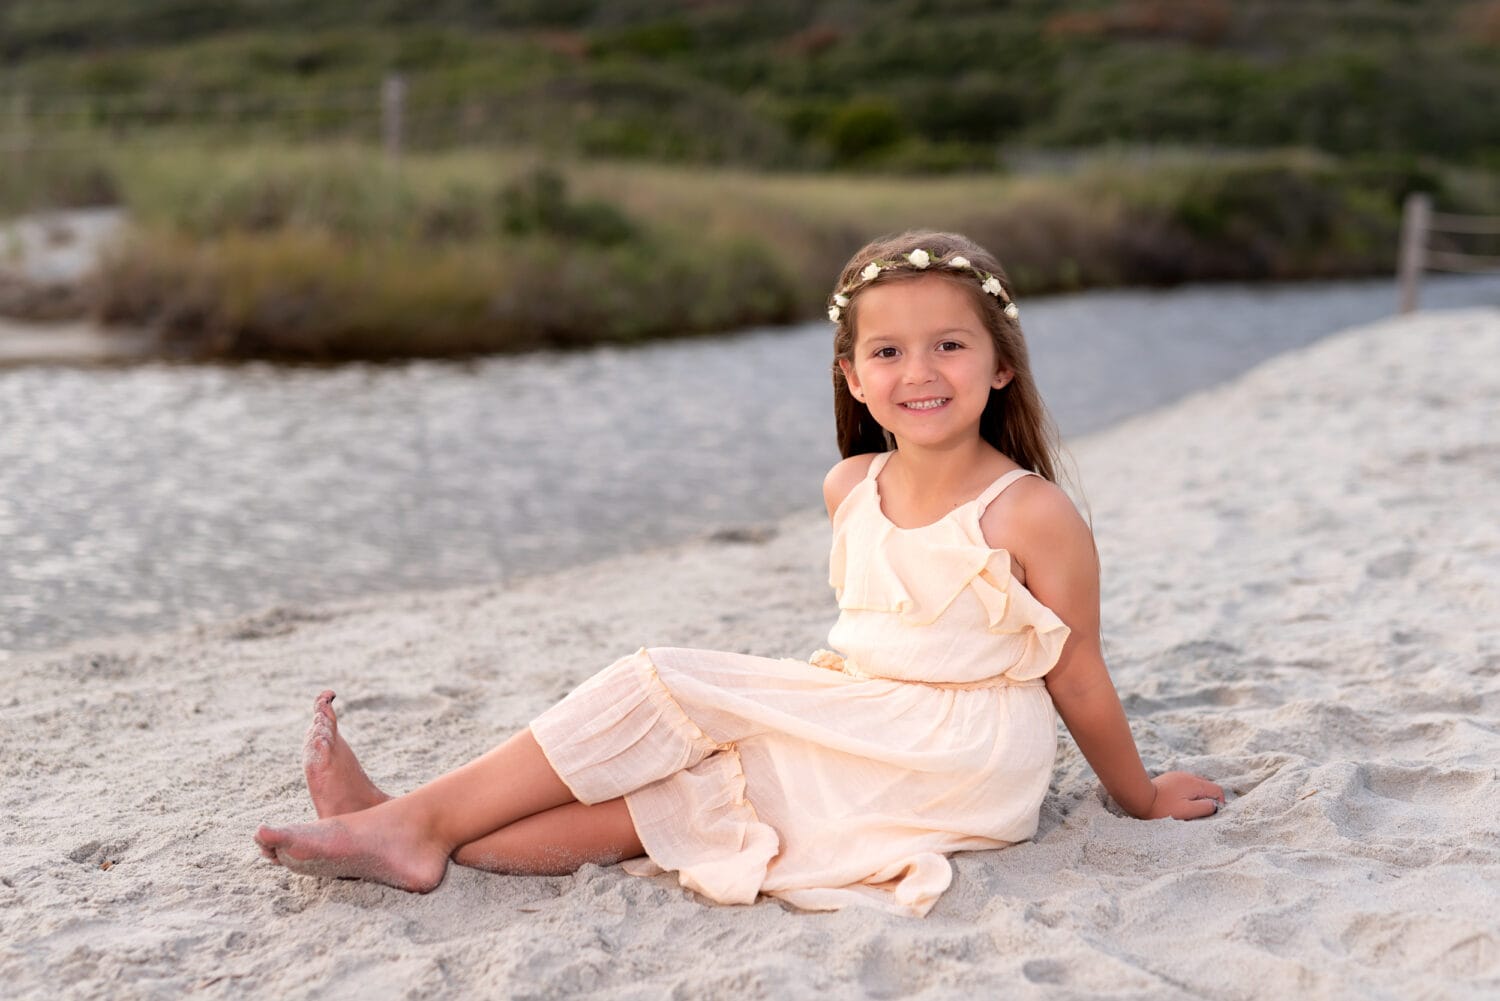 Little girl sitting in the sand - Myrtle Beach State Park